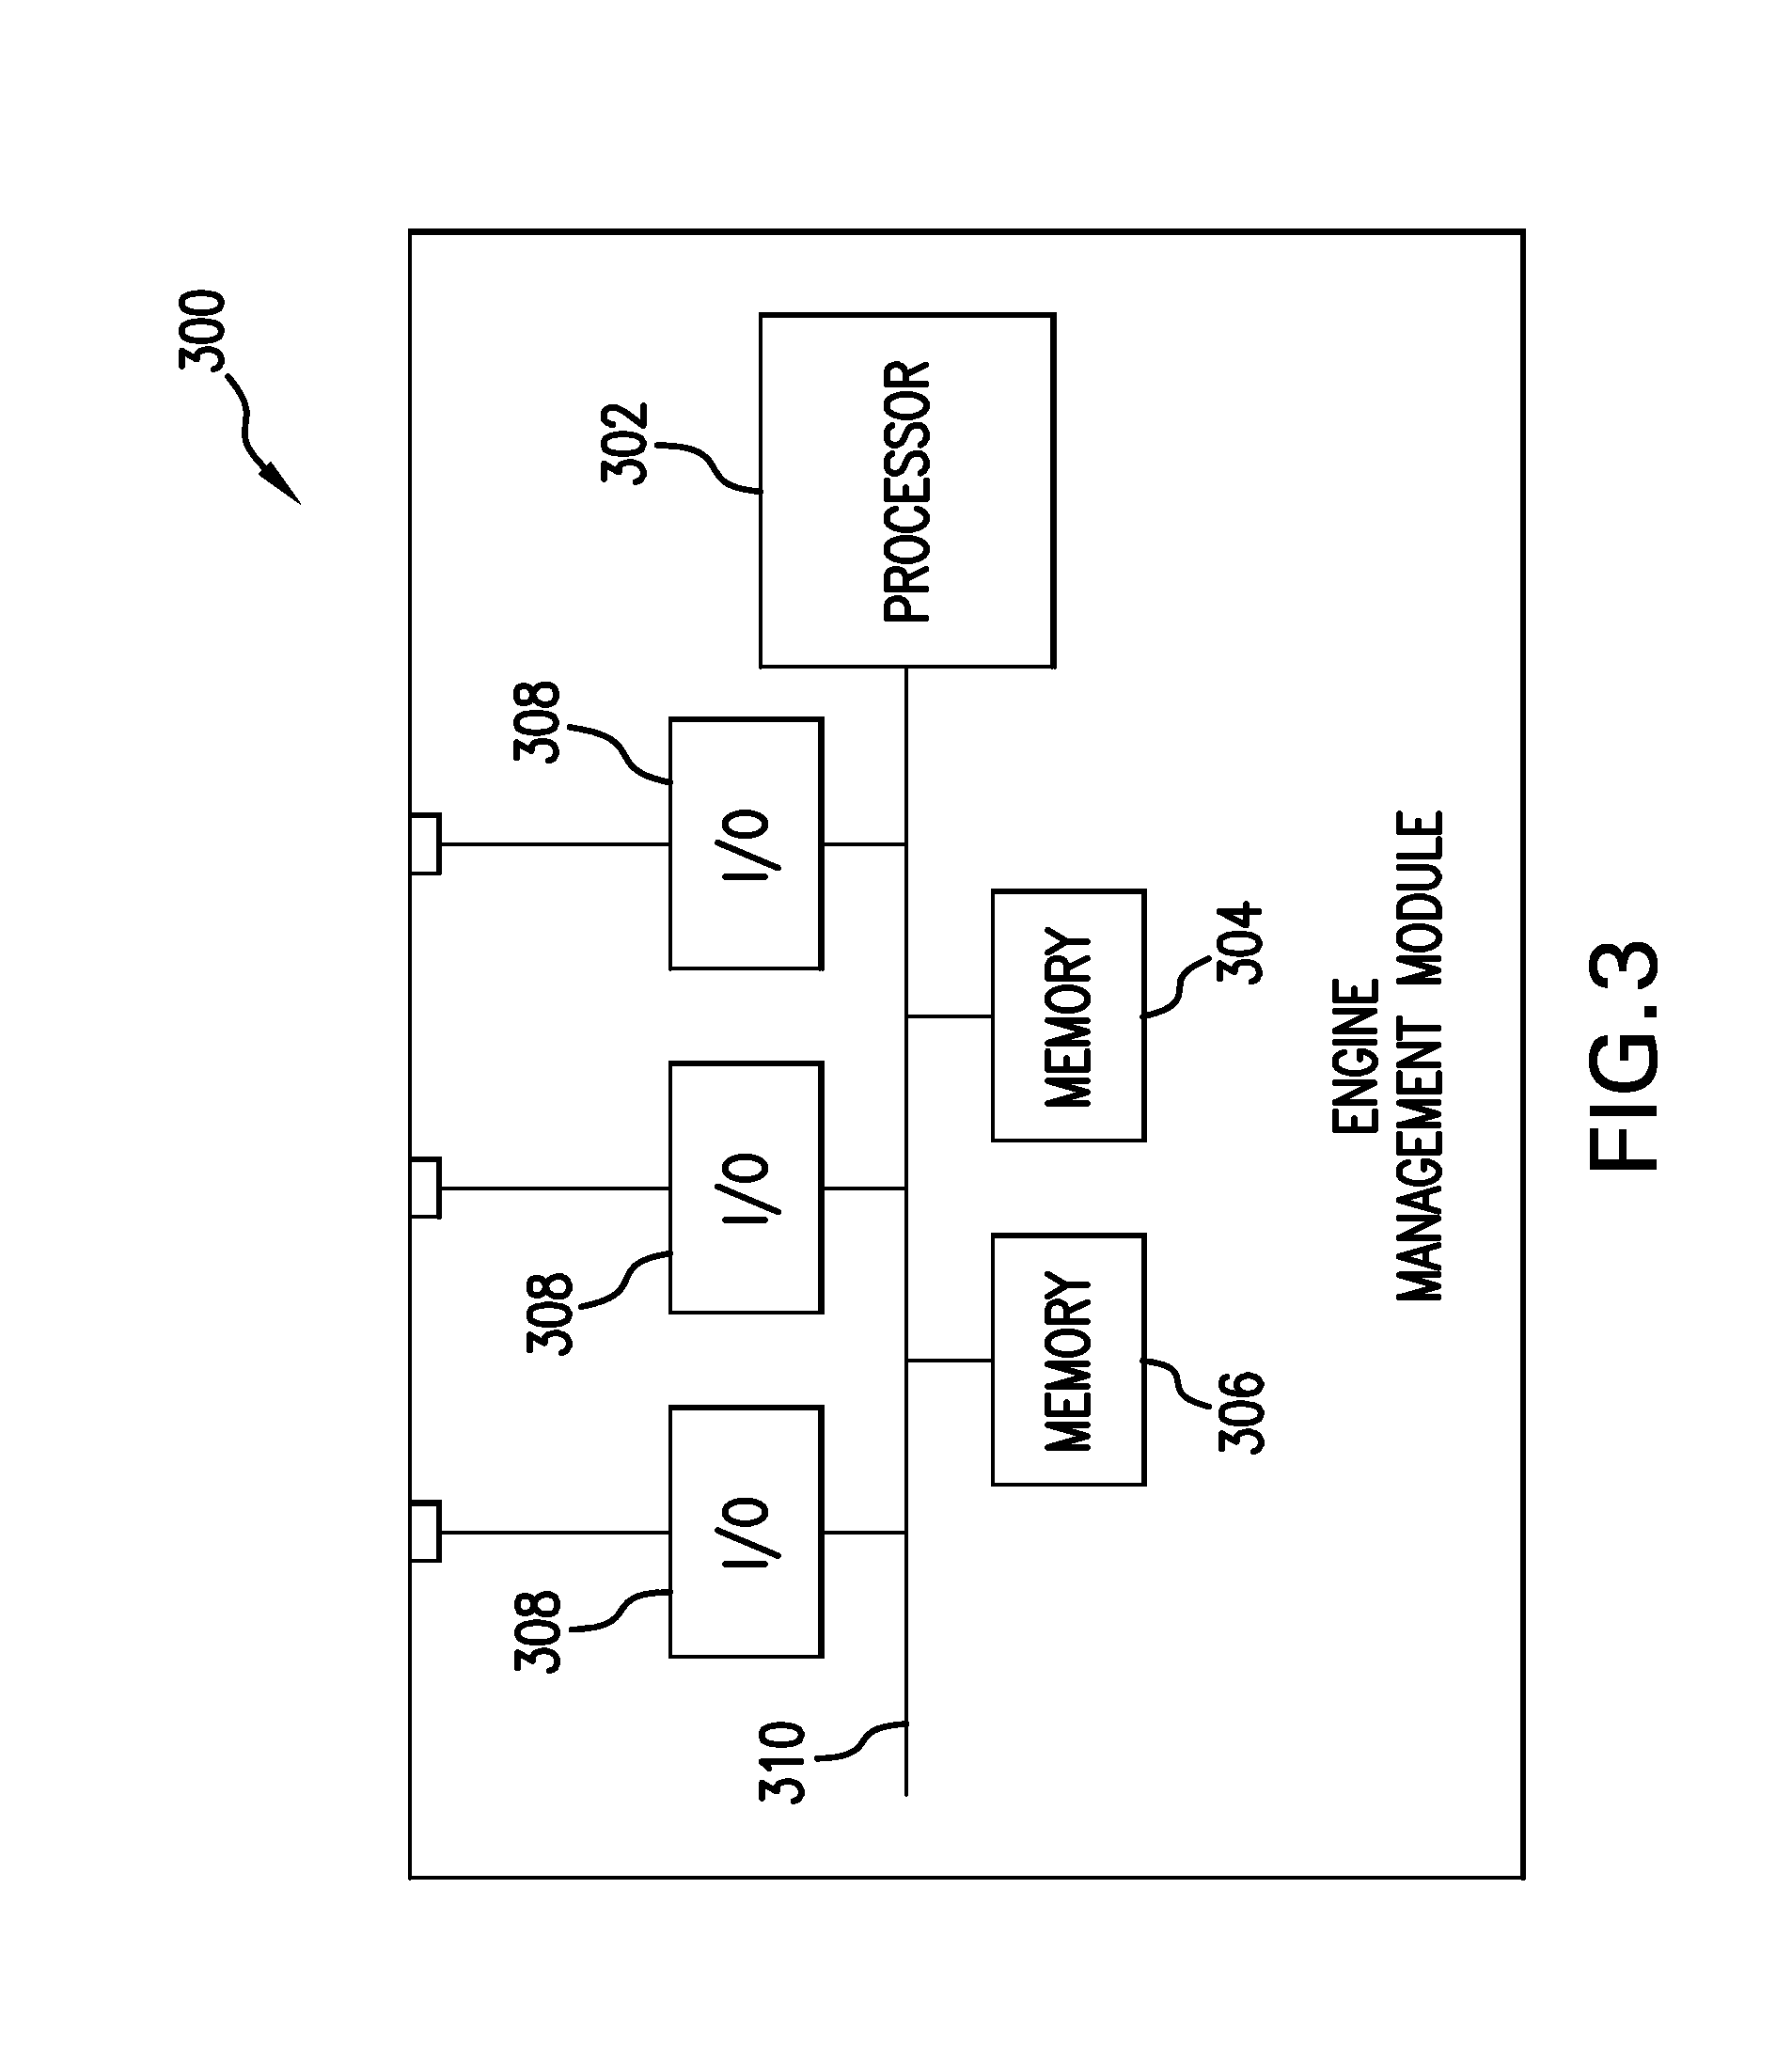 Rig fuel management systems and methods